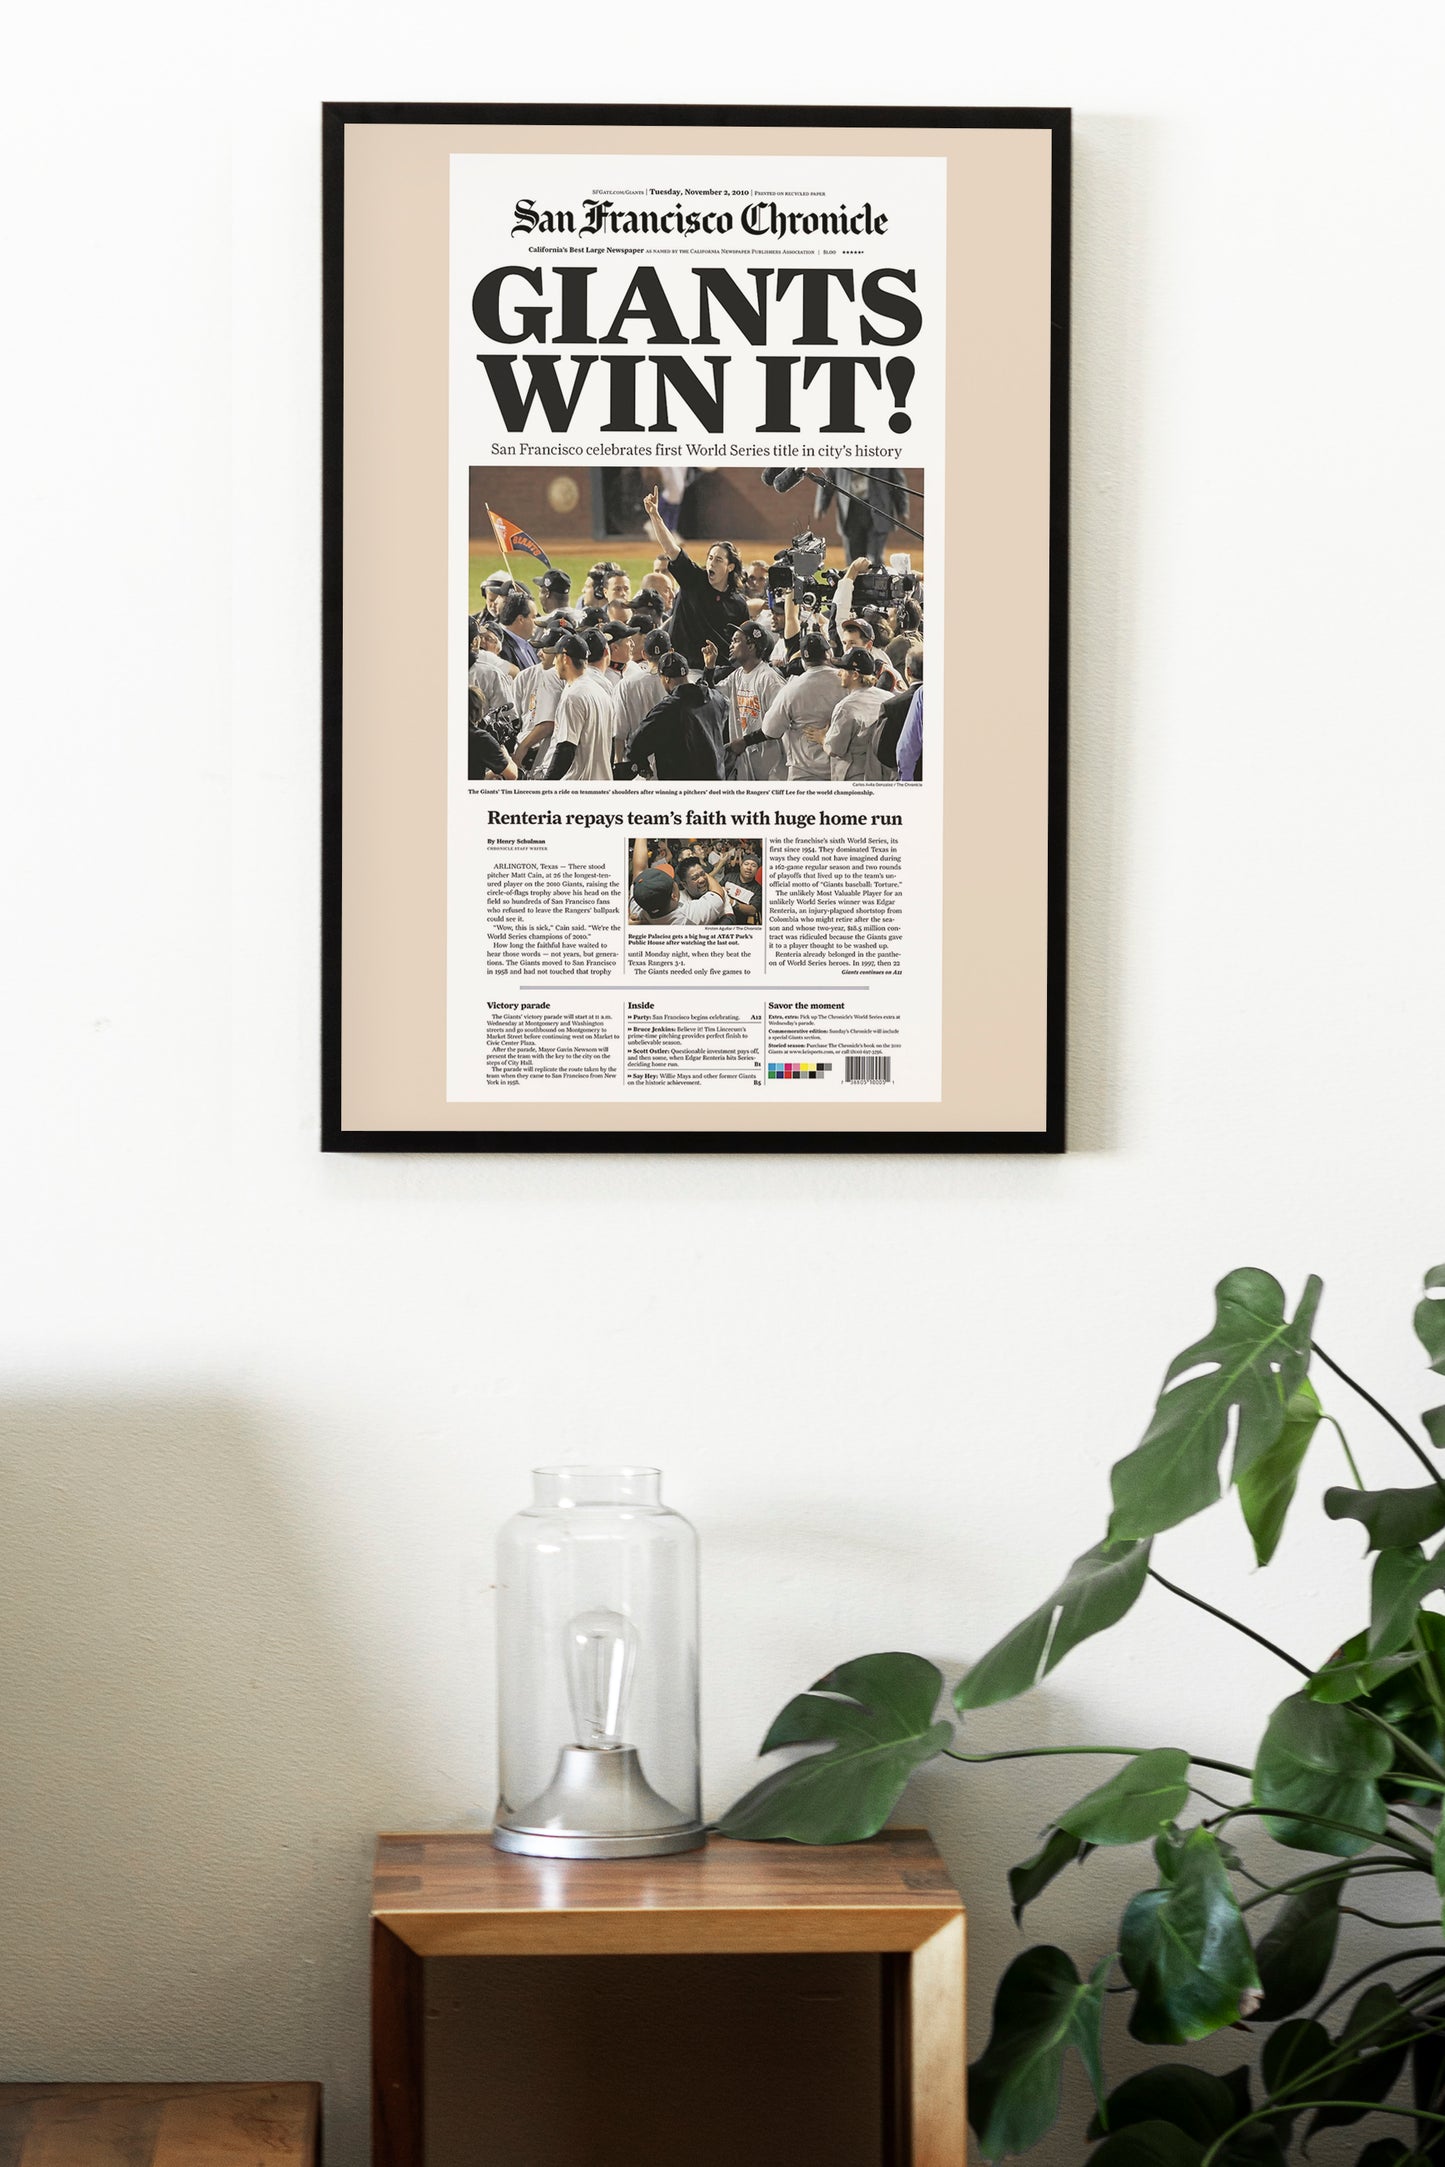 San Francisco Giants 2010 World Series MLB Champions Front Cover San Francisco Chronicle Newspaper Poster